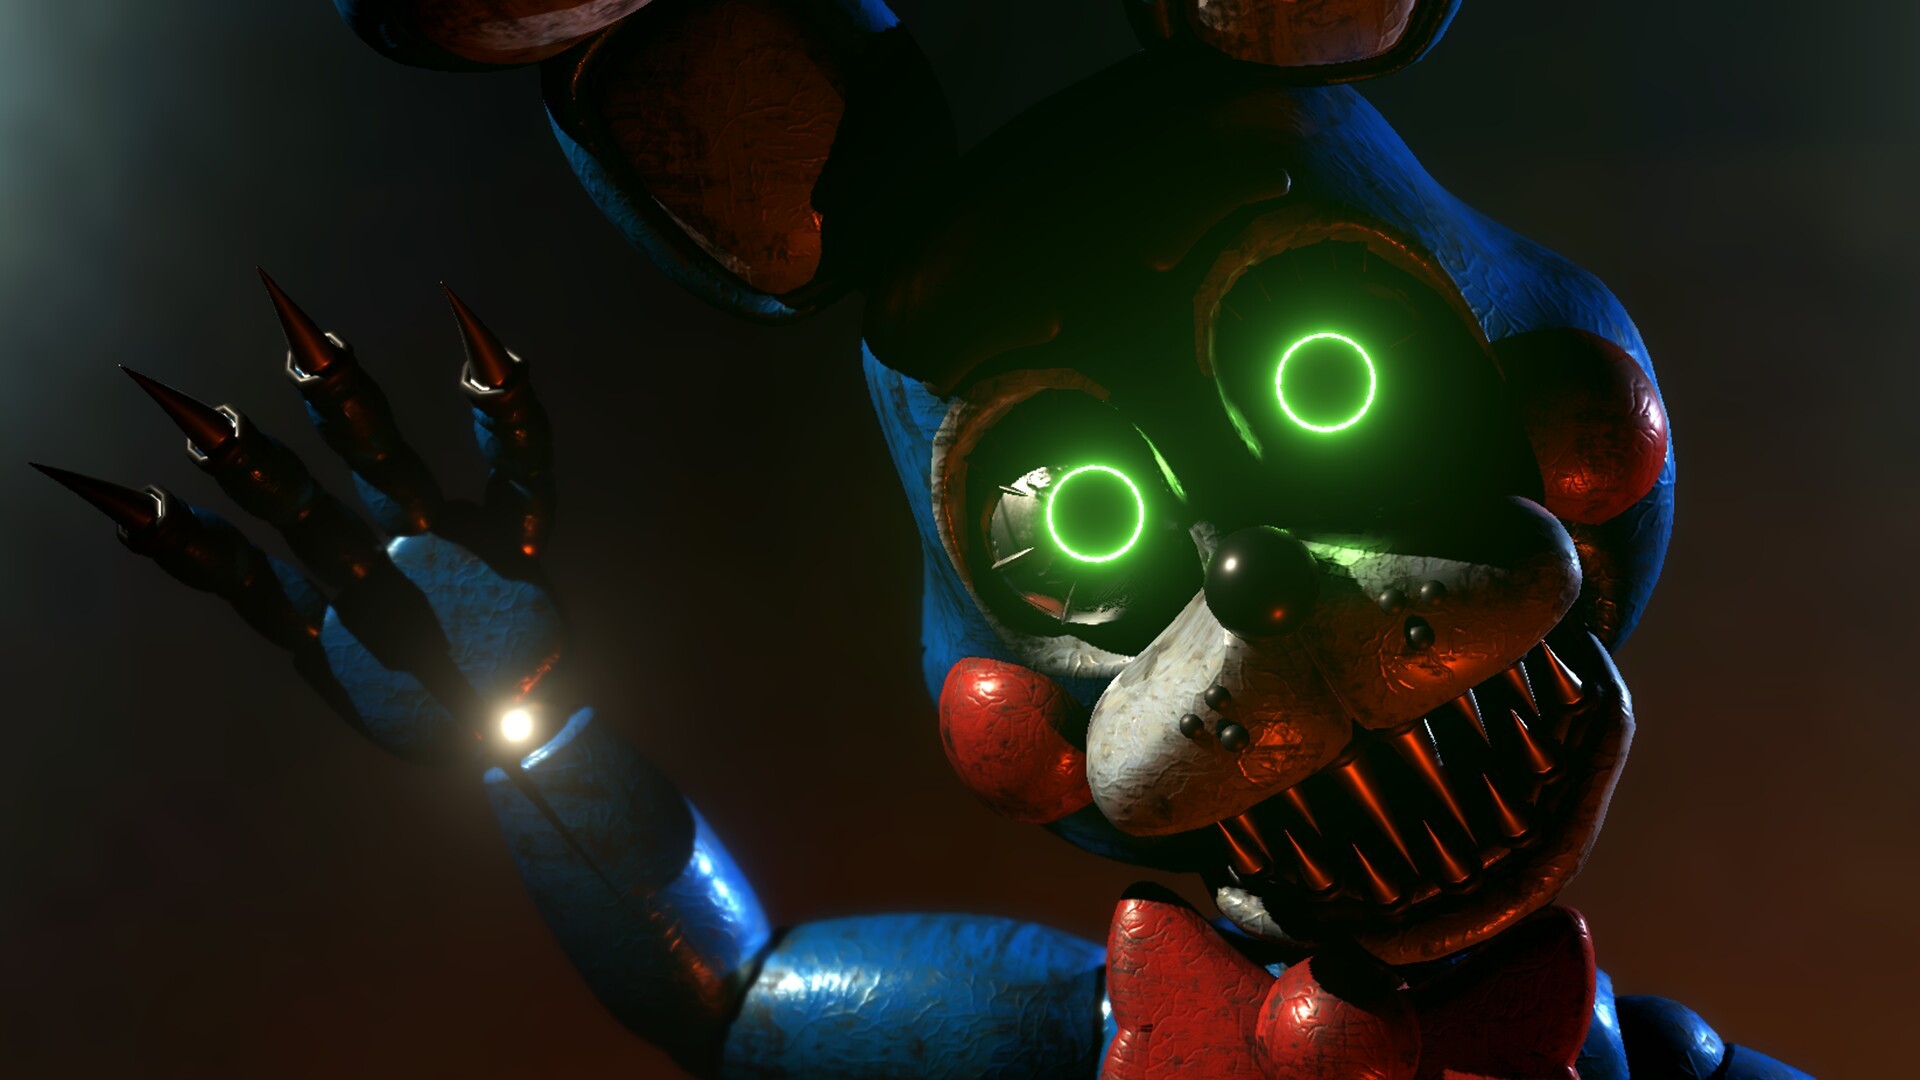 1920x1080 Nightmare Toy bonnie from a new fangame: Sinister Turmoil